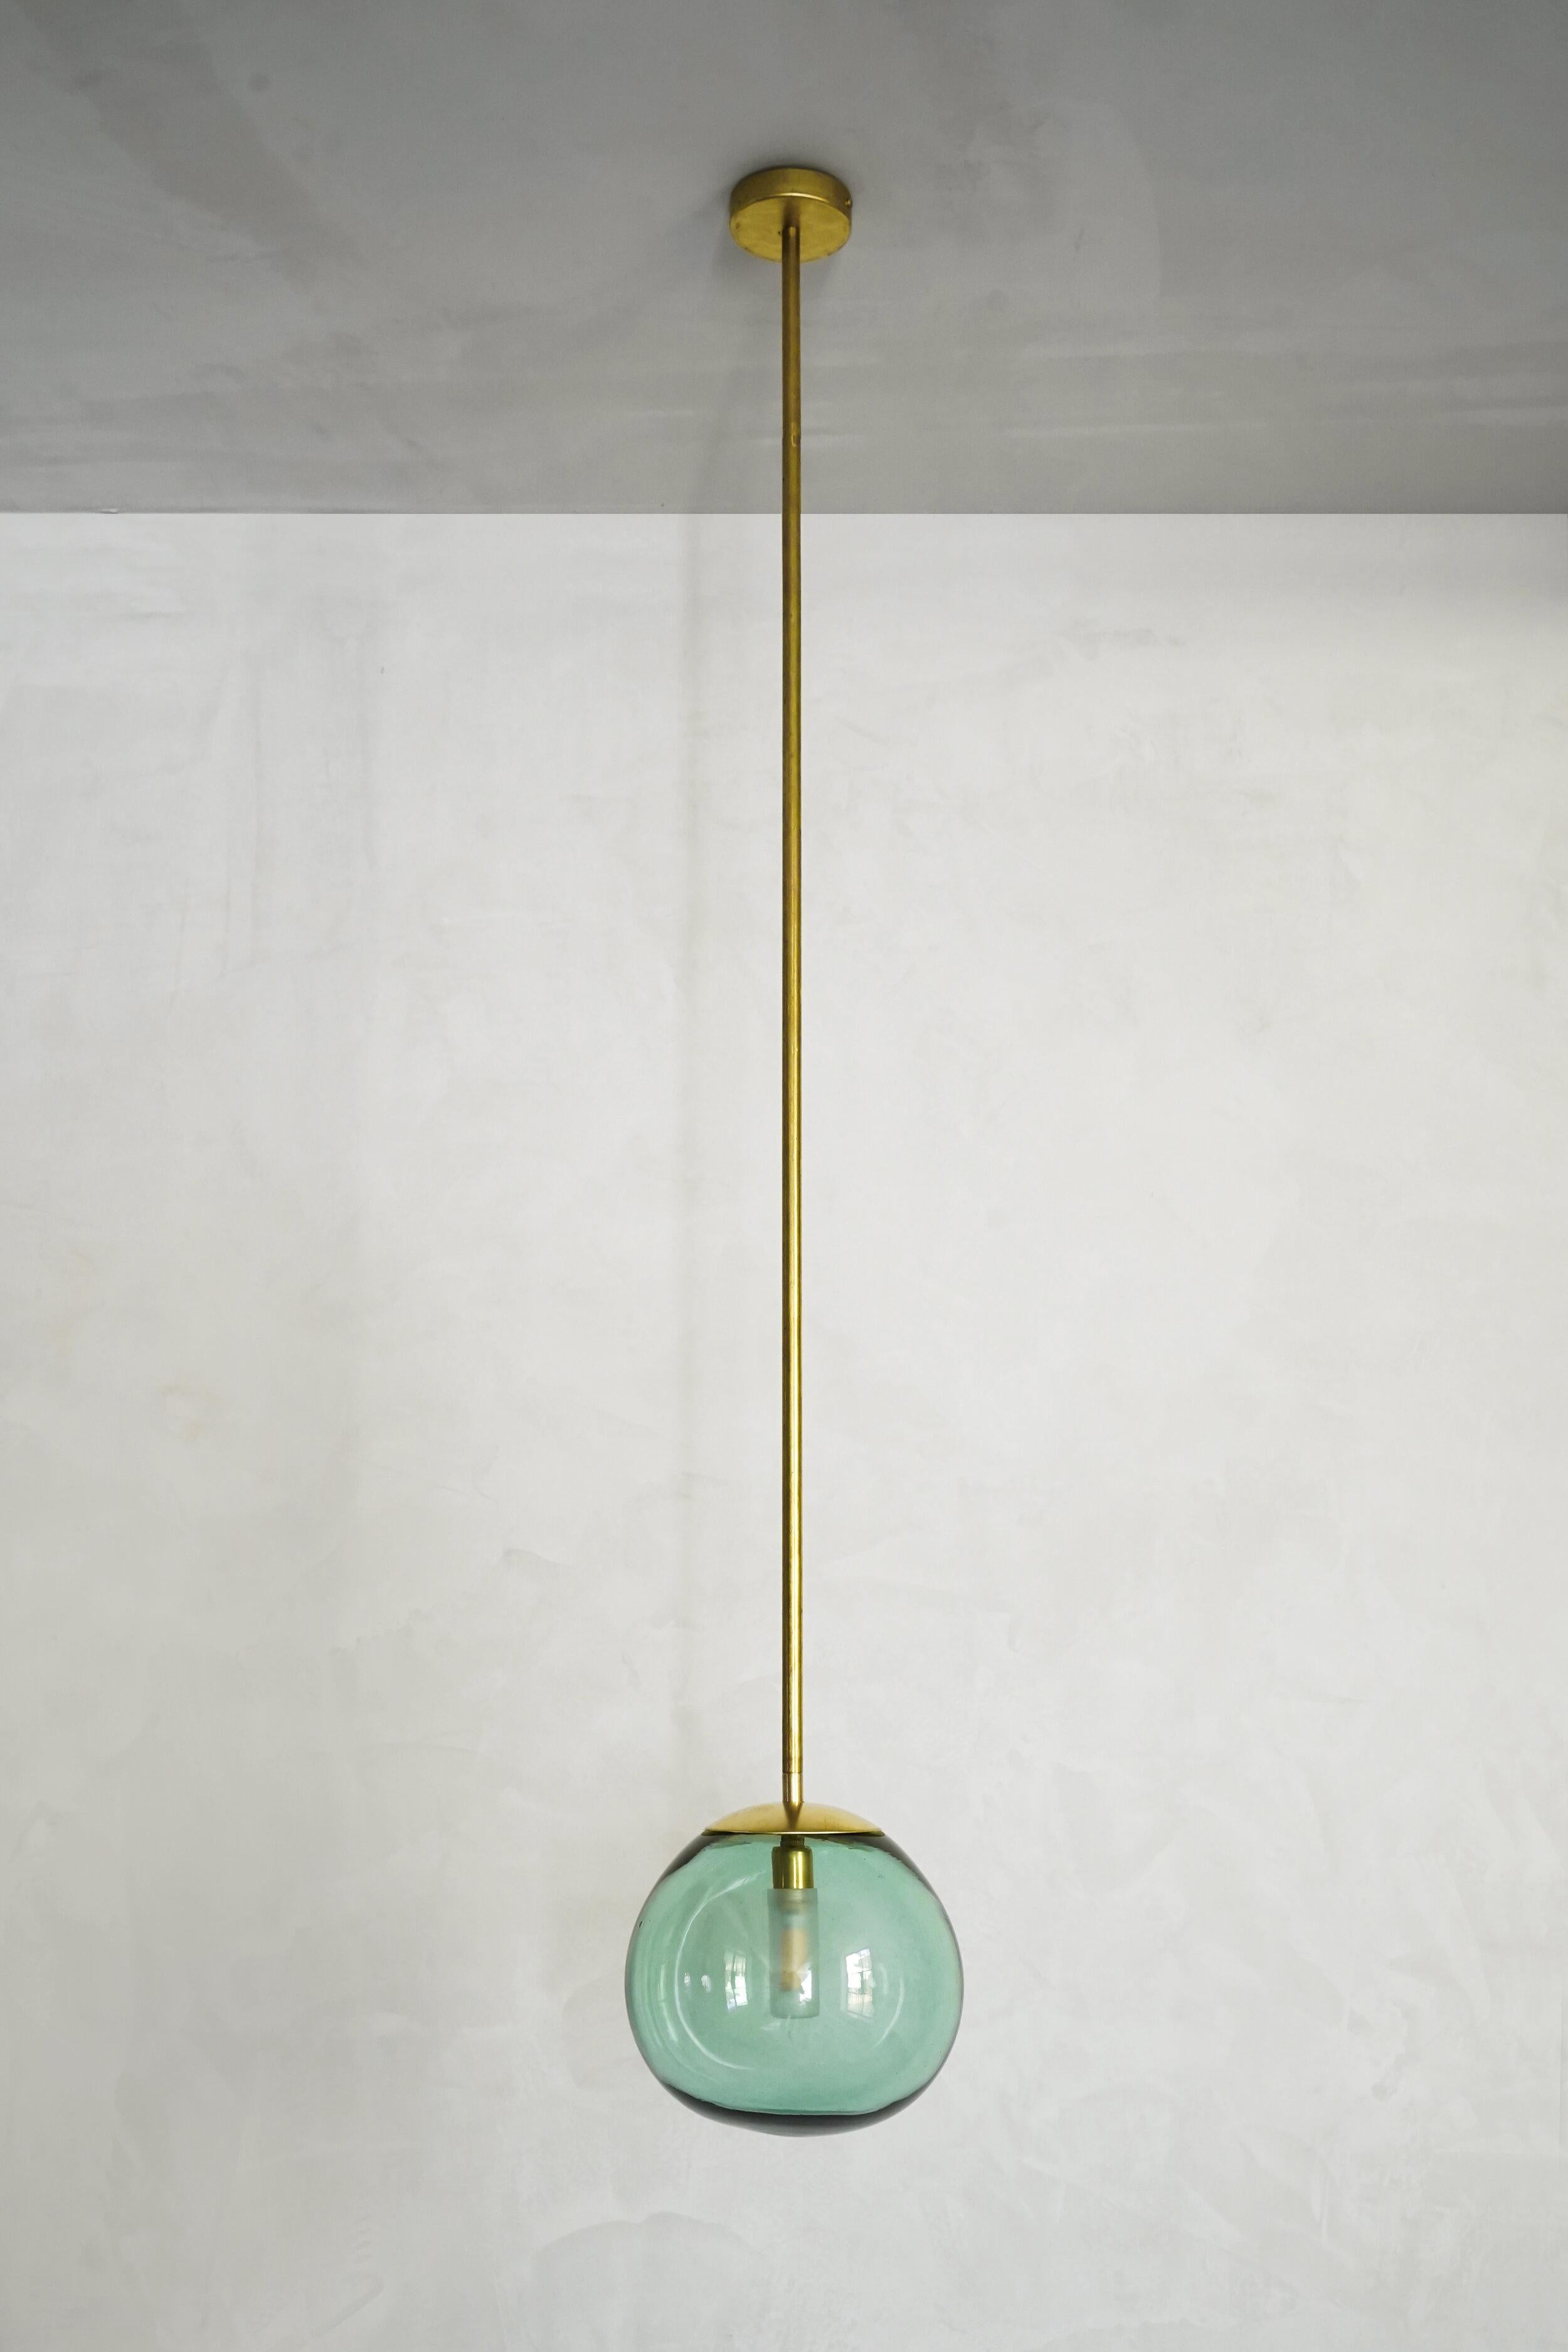 Pendant Ball Tube 20 by Contain
Dimensions: D 20 x H 100 cm (custom length).
Materials: brass tube or cable, 3D printed PLA structure and blown glass from local production.
Available in different finishes and dimensions.

All our lamps can be wired